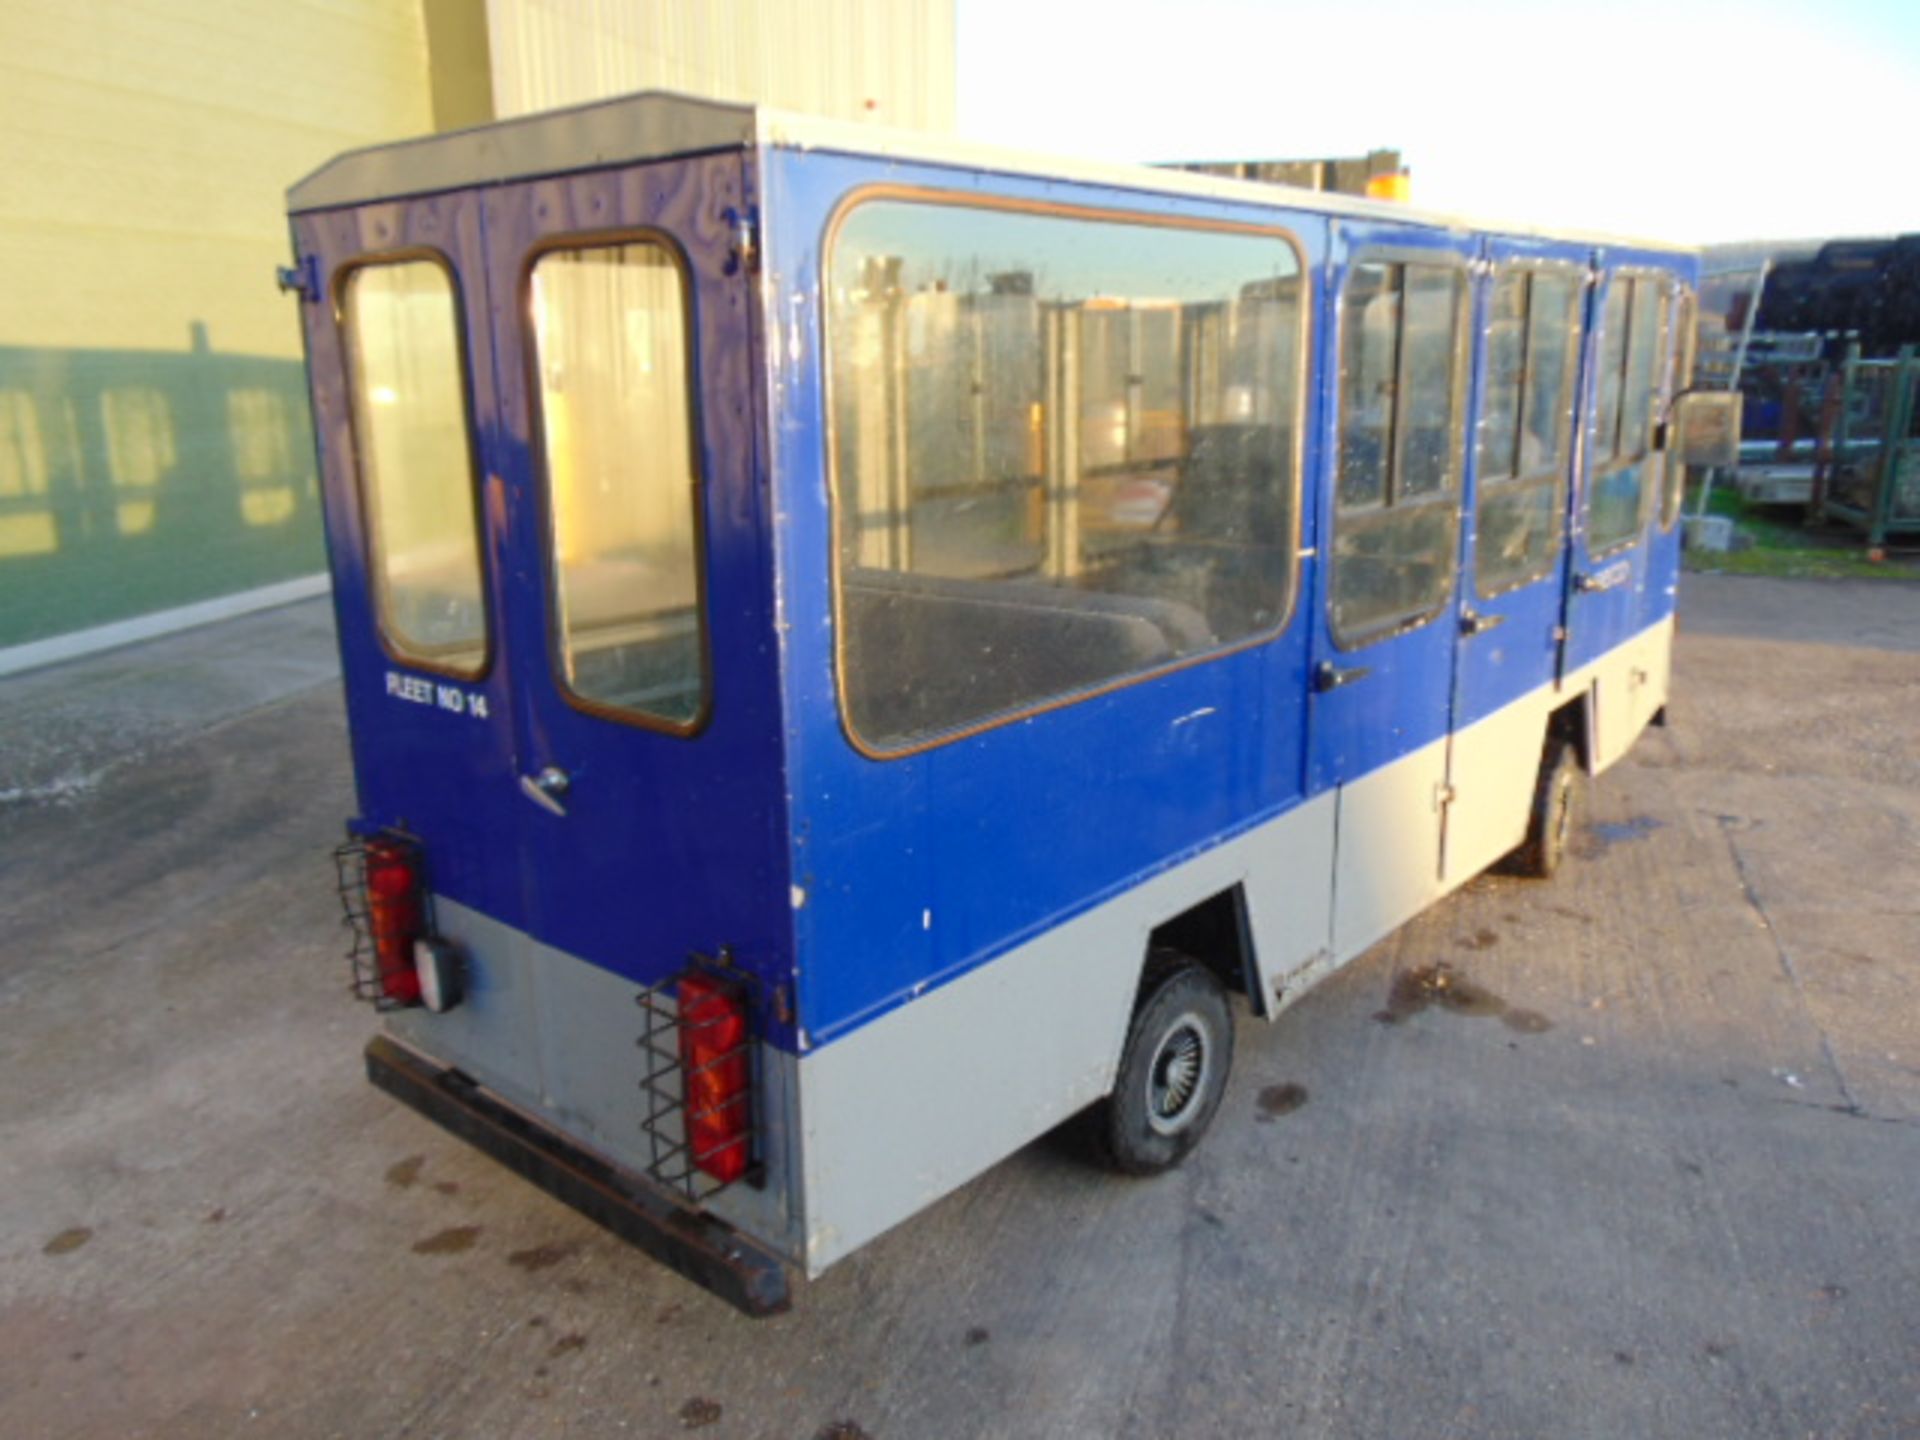 Electricars PC 957 Site Pick-Up Vehicle - Image 2 of 14